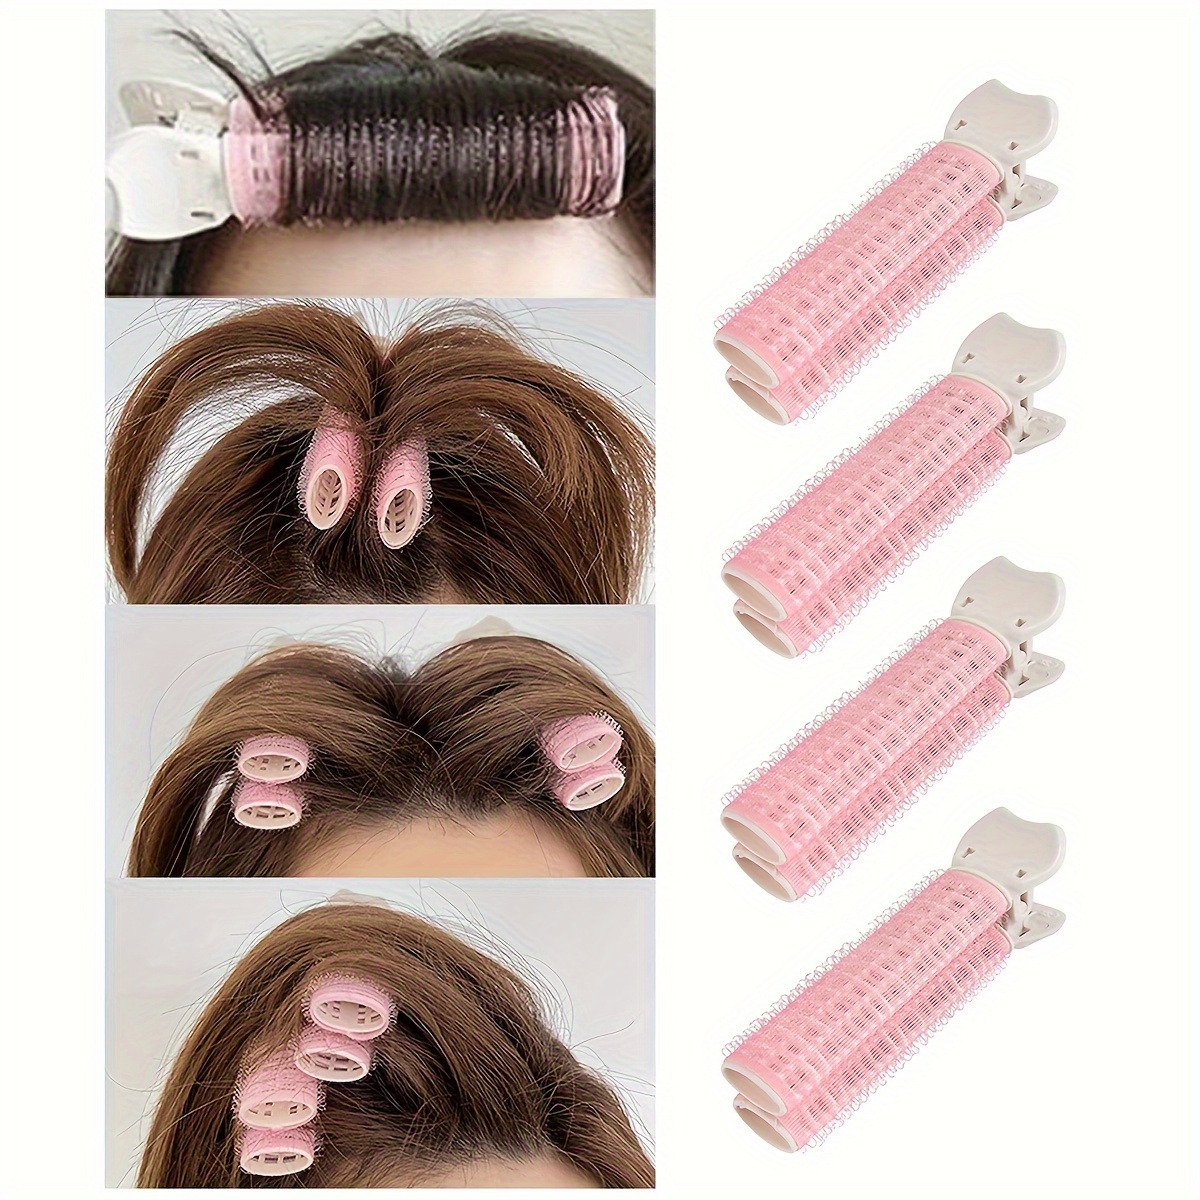 

4pcs/set Volumizing Hair Root Rollers Fluffy Air Bangs Tools Heartless Hair Curlers Diy Hair Styling Accessories For Women And Daily Use